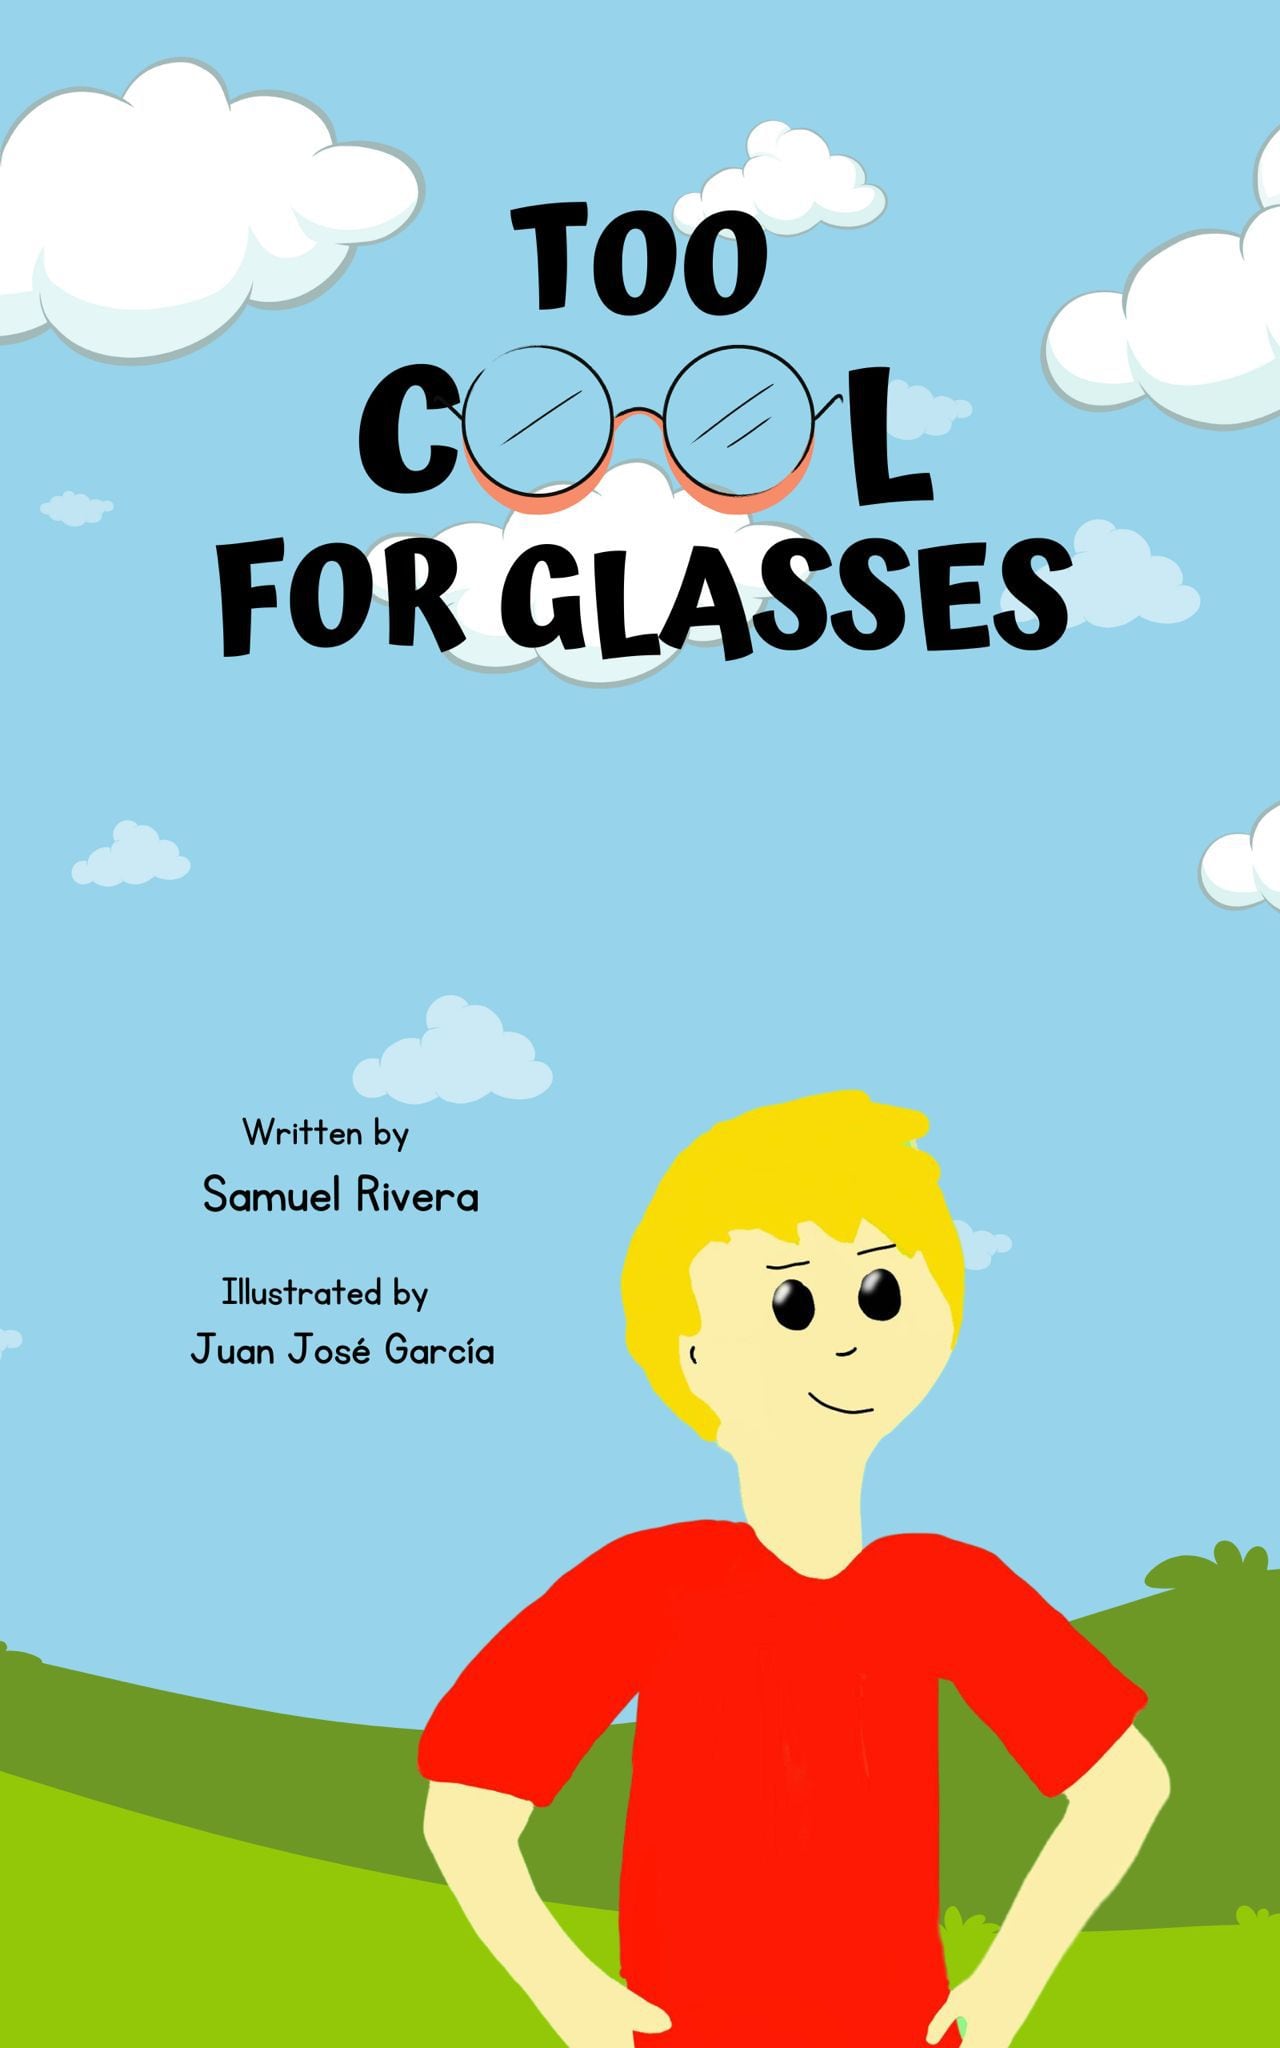 El libro ‘Too cool for glasses’